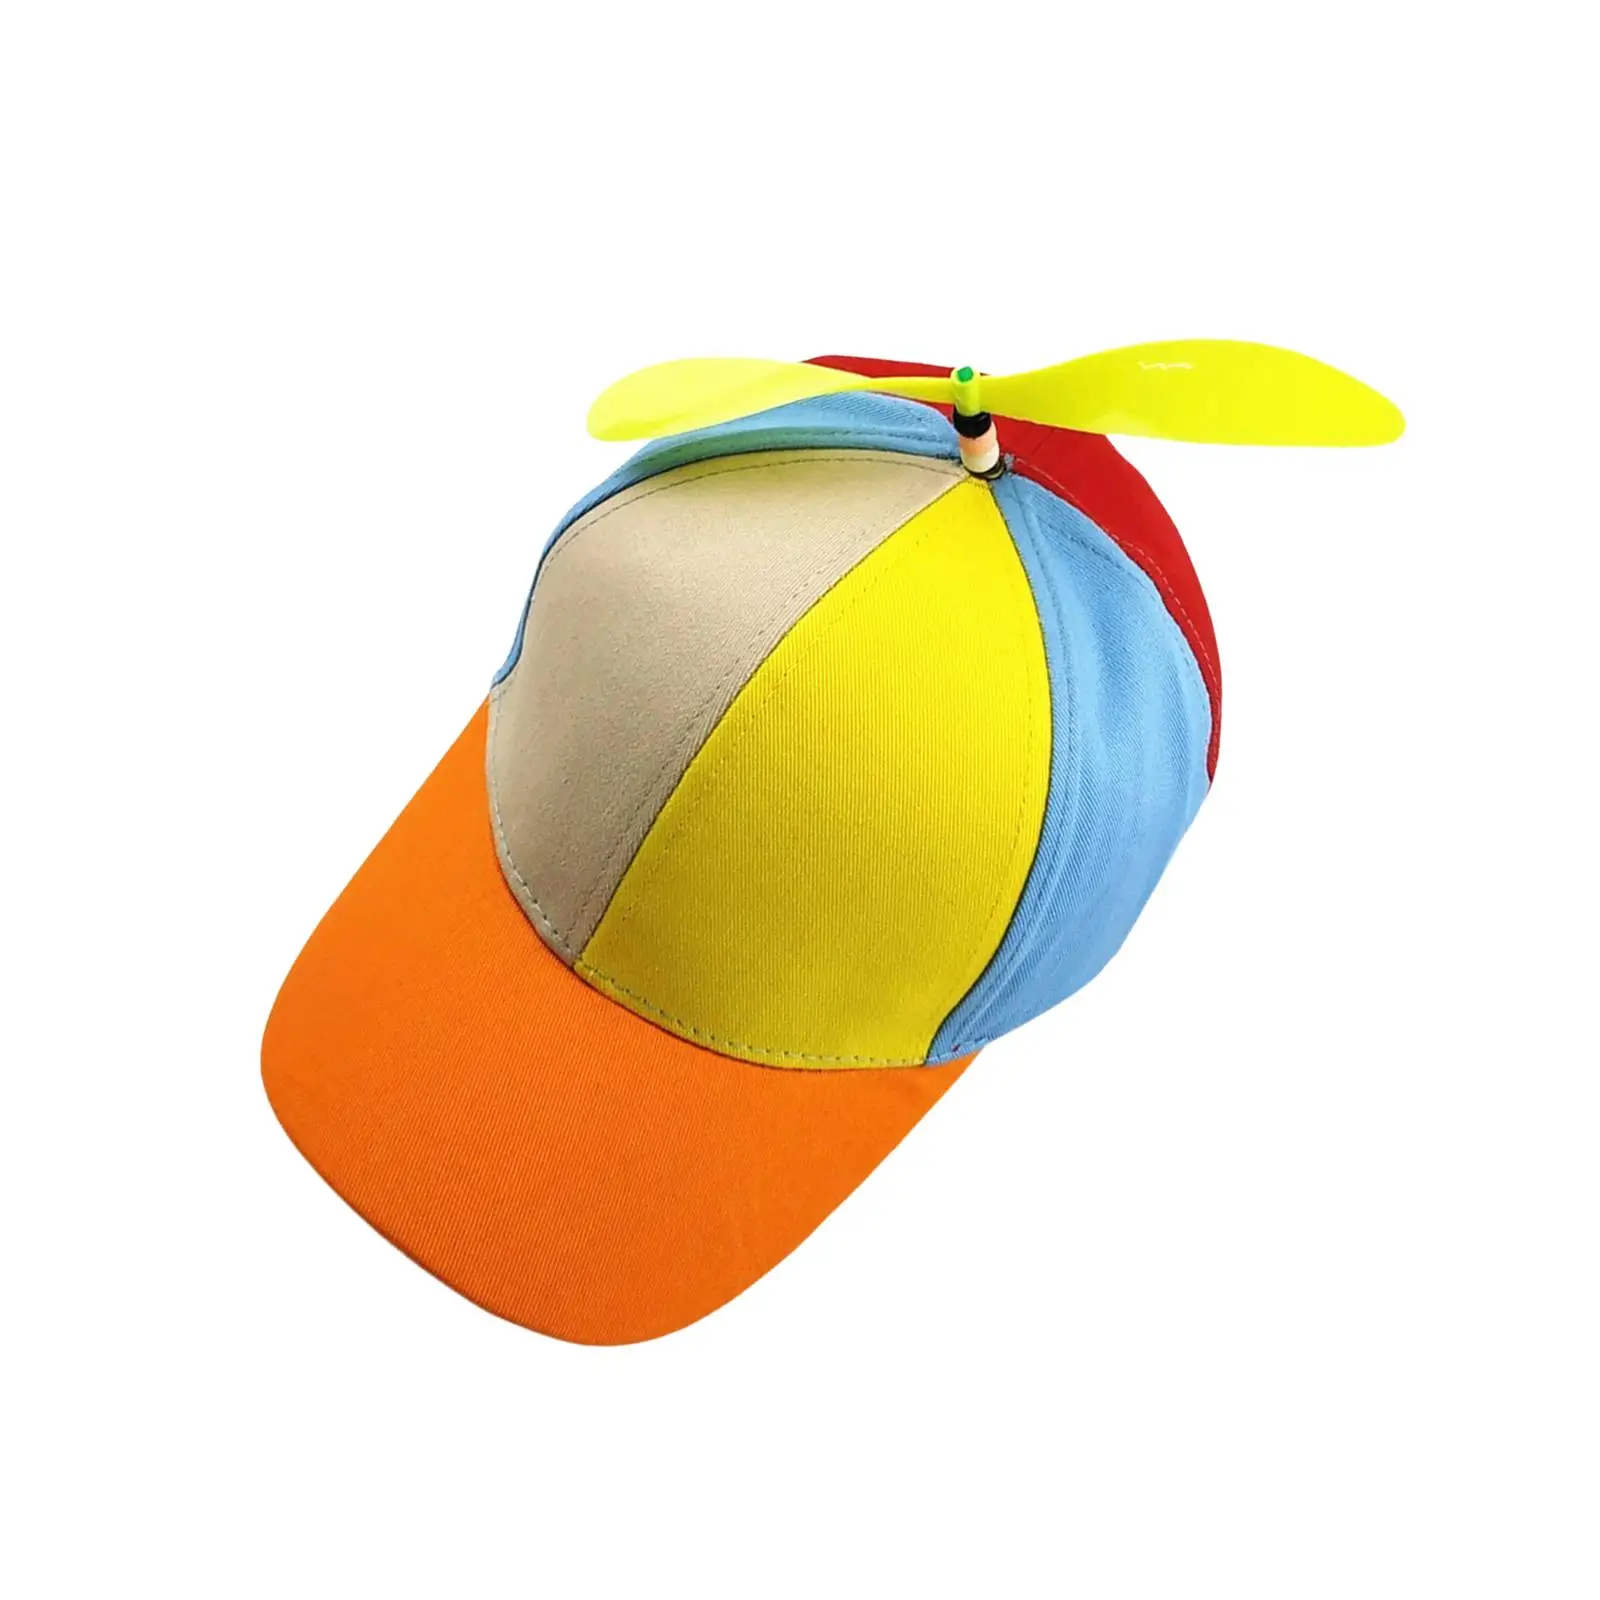 Funny Propeller Hat Colorful Novelty Breathable Baseball Cap Helicopter Caps for Costume Outdoor Casual Fancy Dress Kids